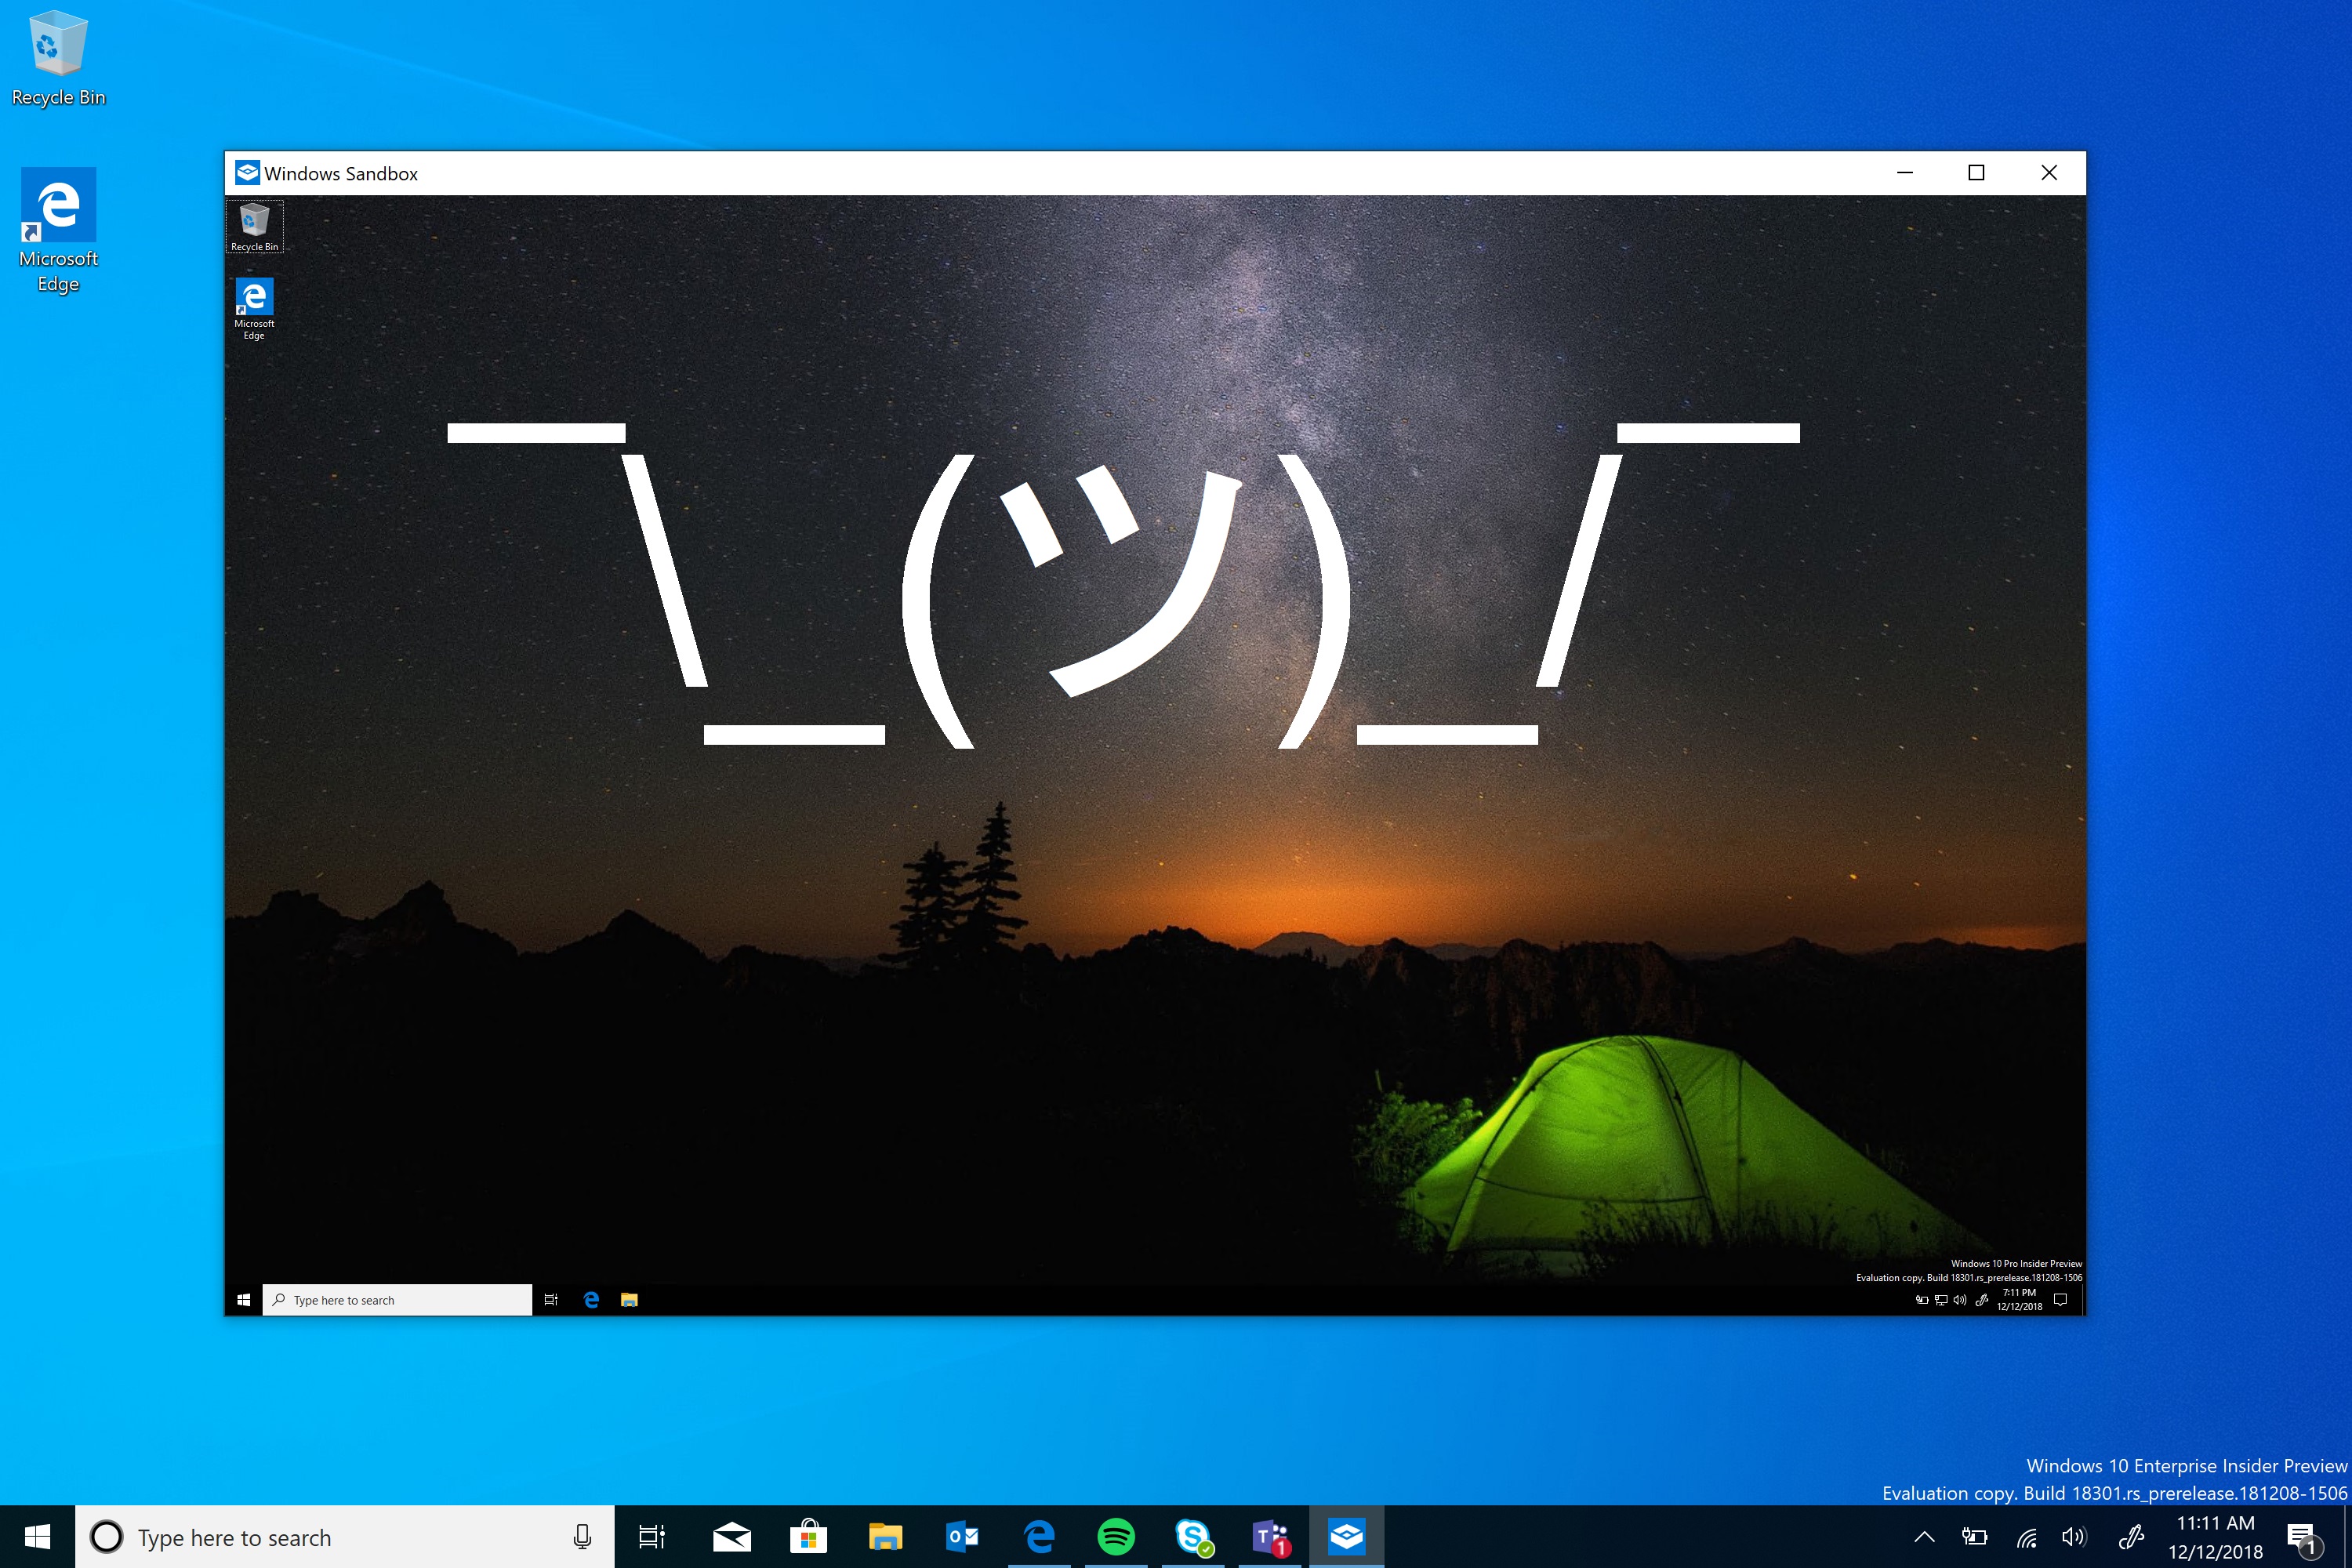  Windows 10 users are soon to be hit with nagging prompts asking them to create an online account 